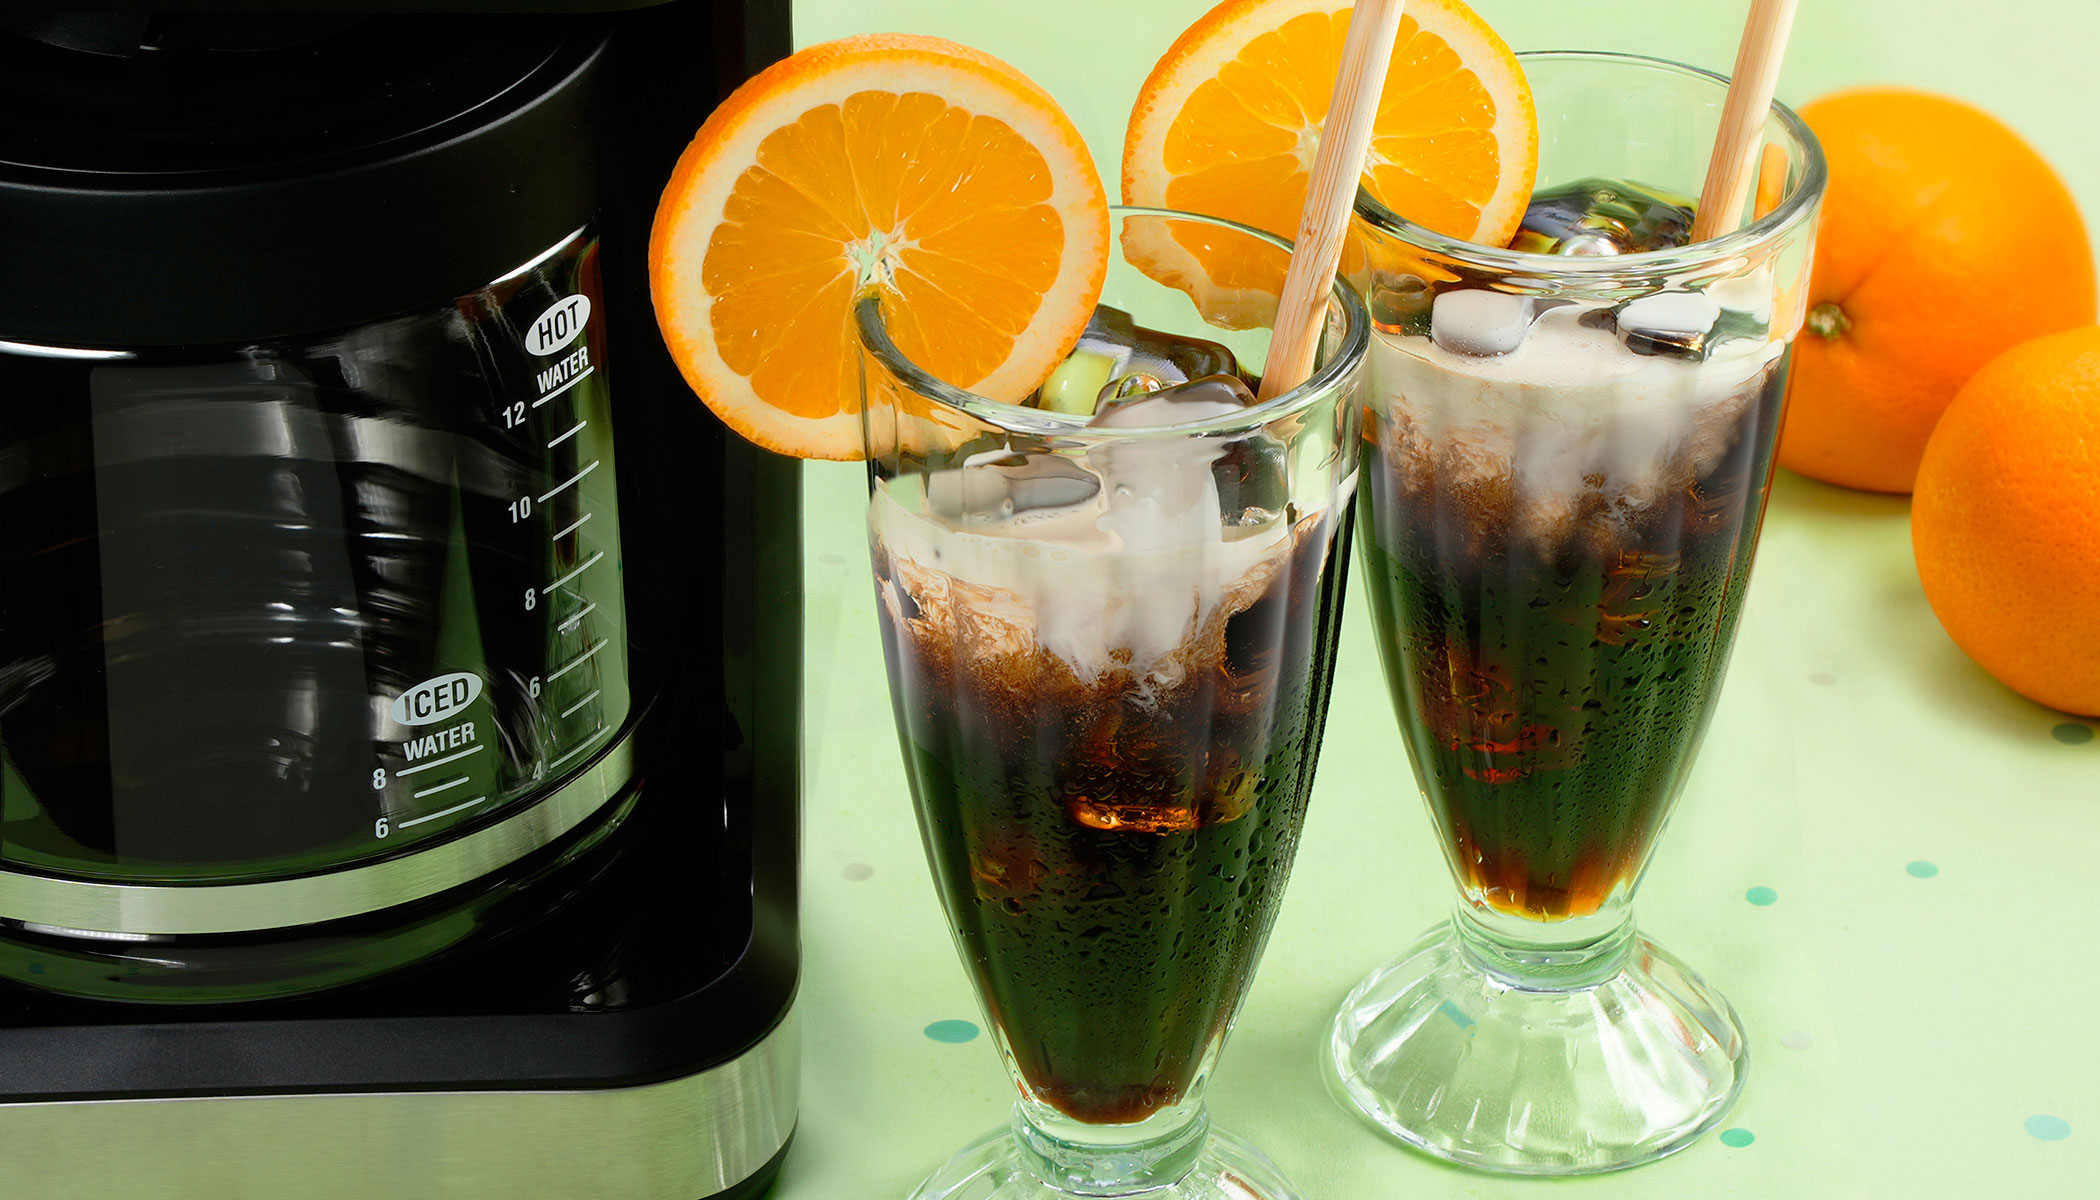 Two glasses of iced coffee with a splash of cream topped with an decorative orange slice and a straw. Two oranges in the background and a coffee maker on the left.